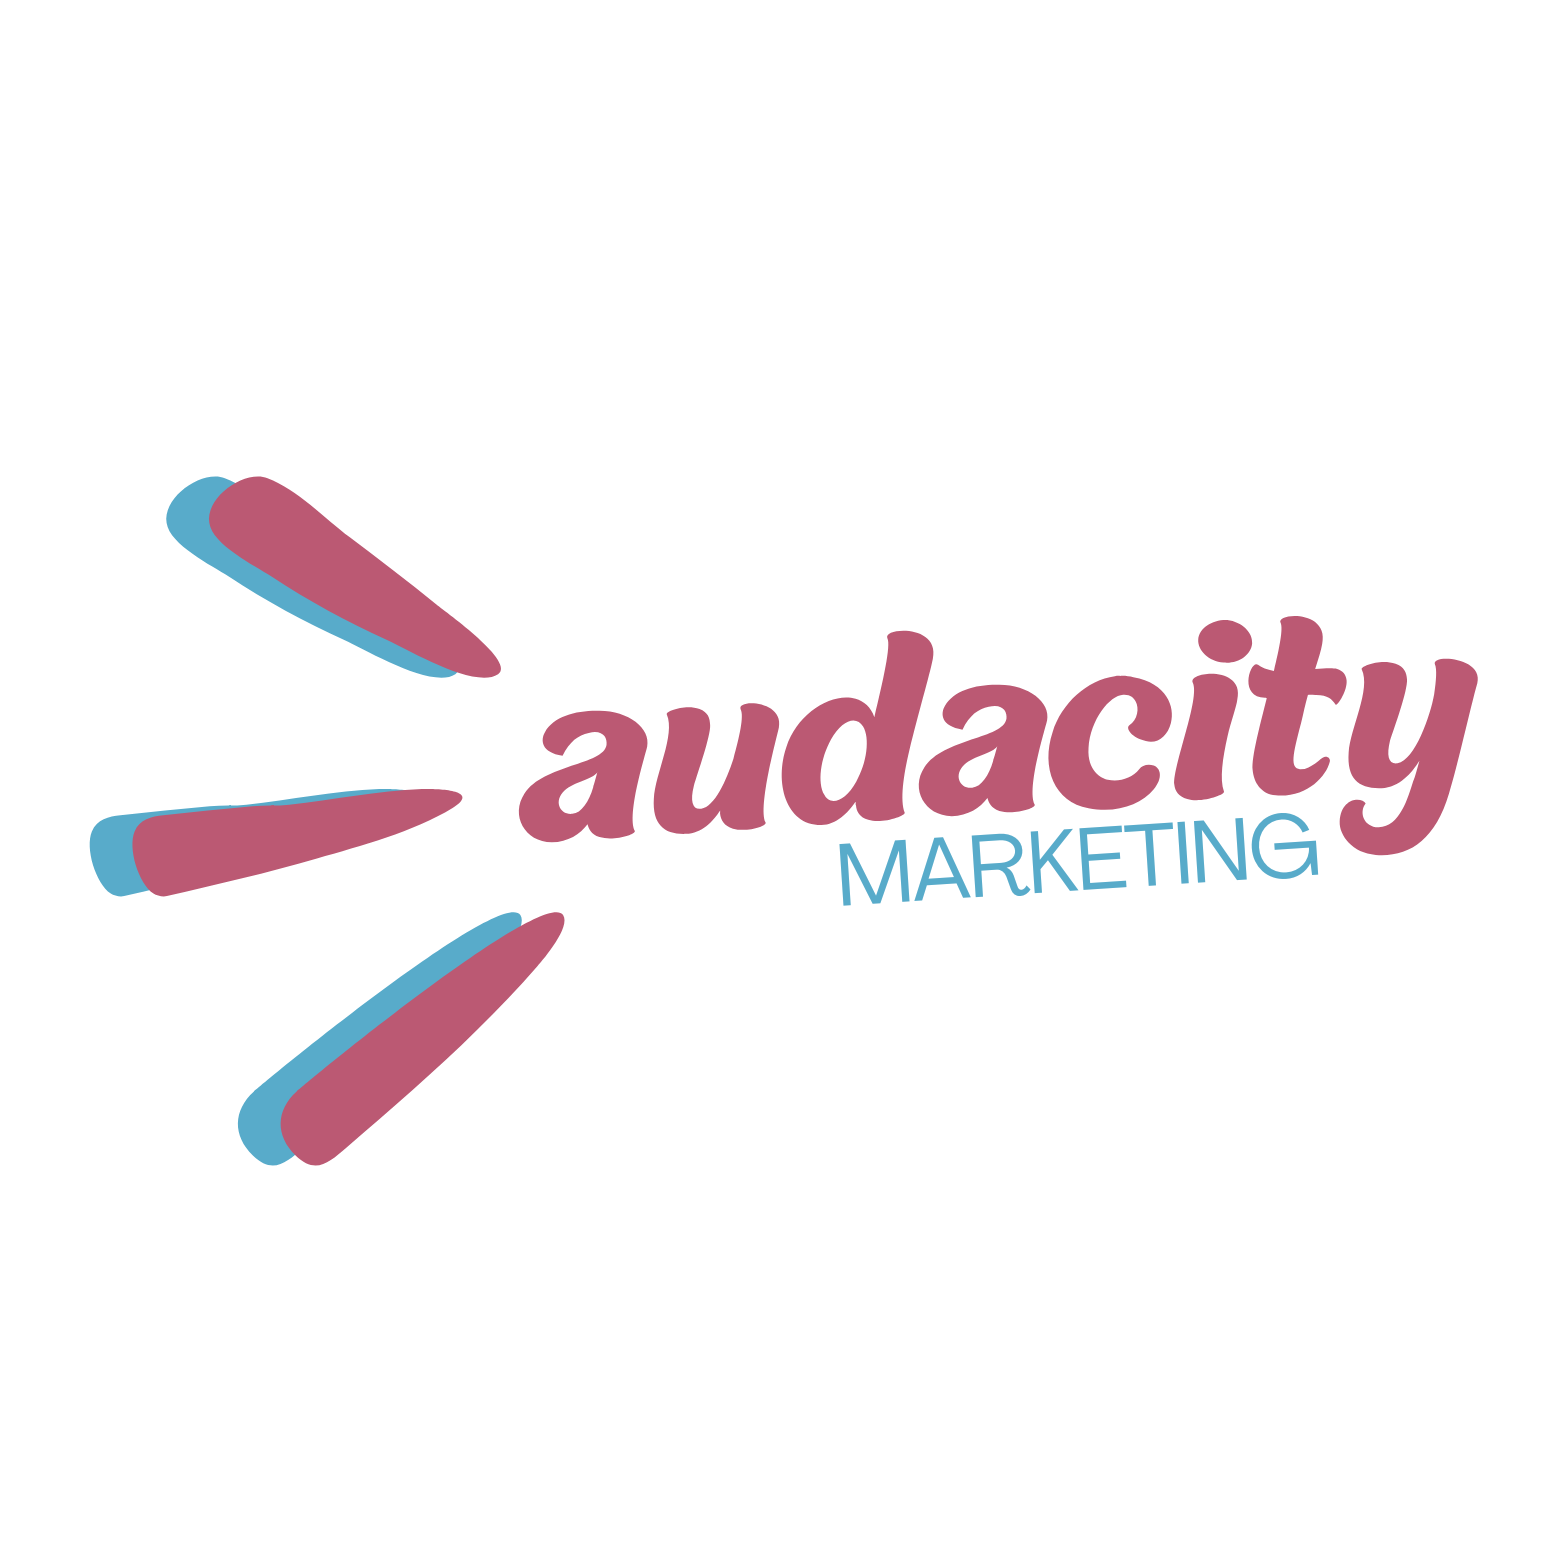 Audacity Marketing on Mastering In-Person Networking - A Guide for Thriving at Conferences